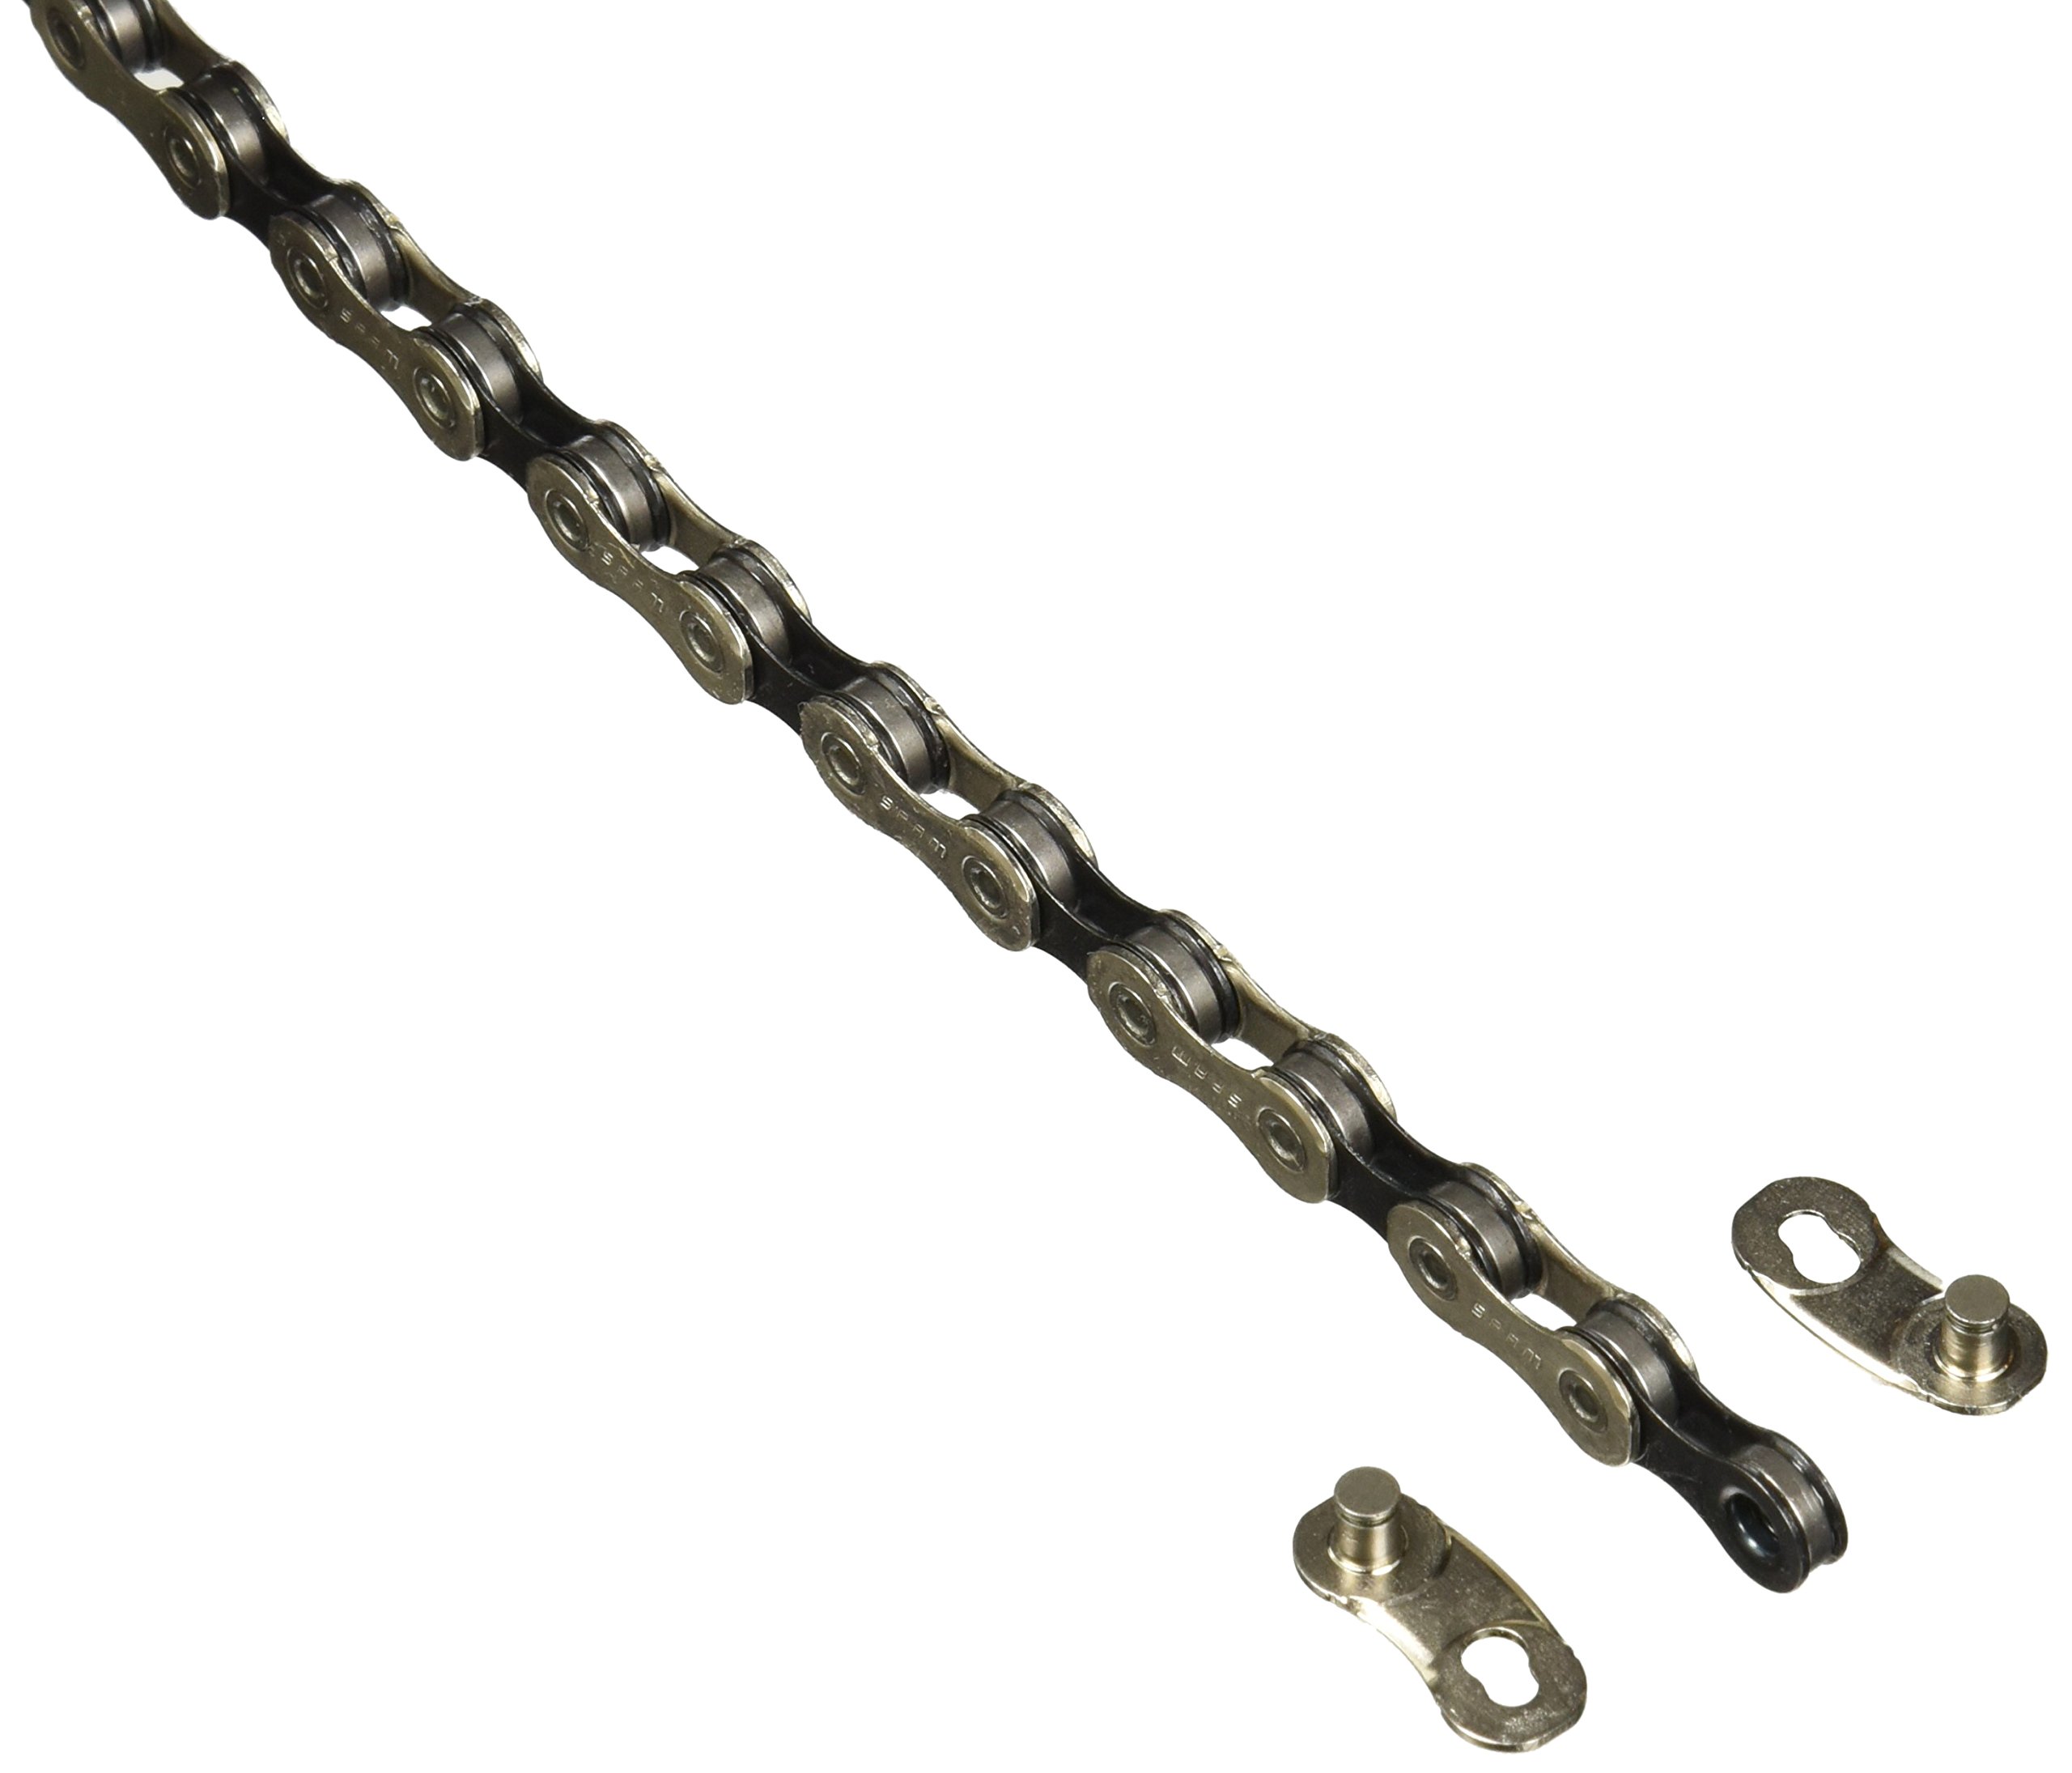  SRAM GX Eagle Hollow Pin 12-Speed Chain 126 Links with  PowerLock, Silver/Gray : Sports & Outdoors